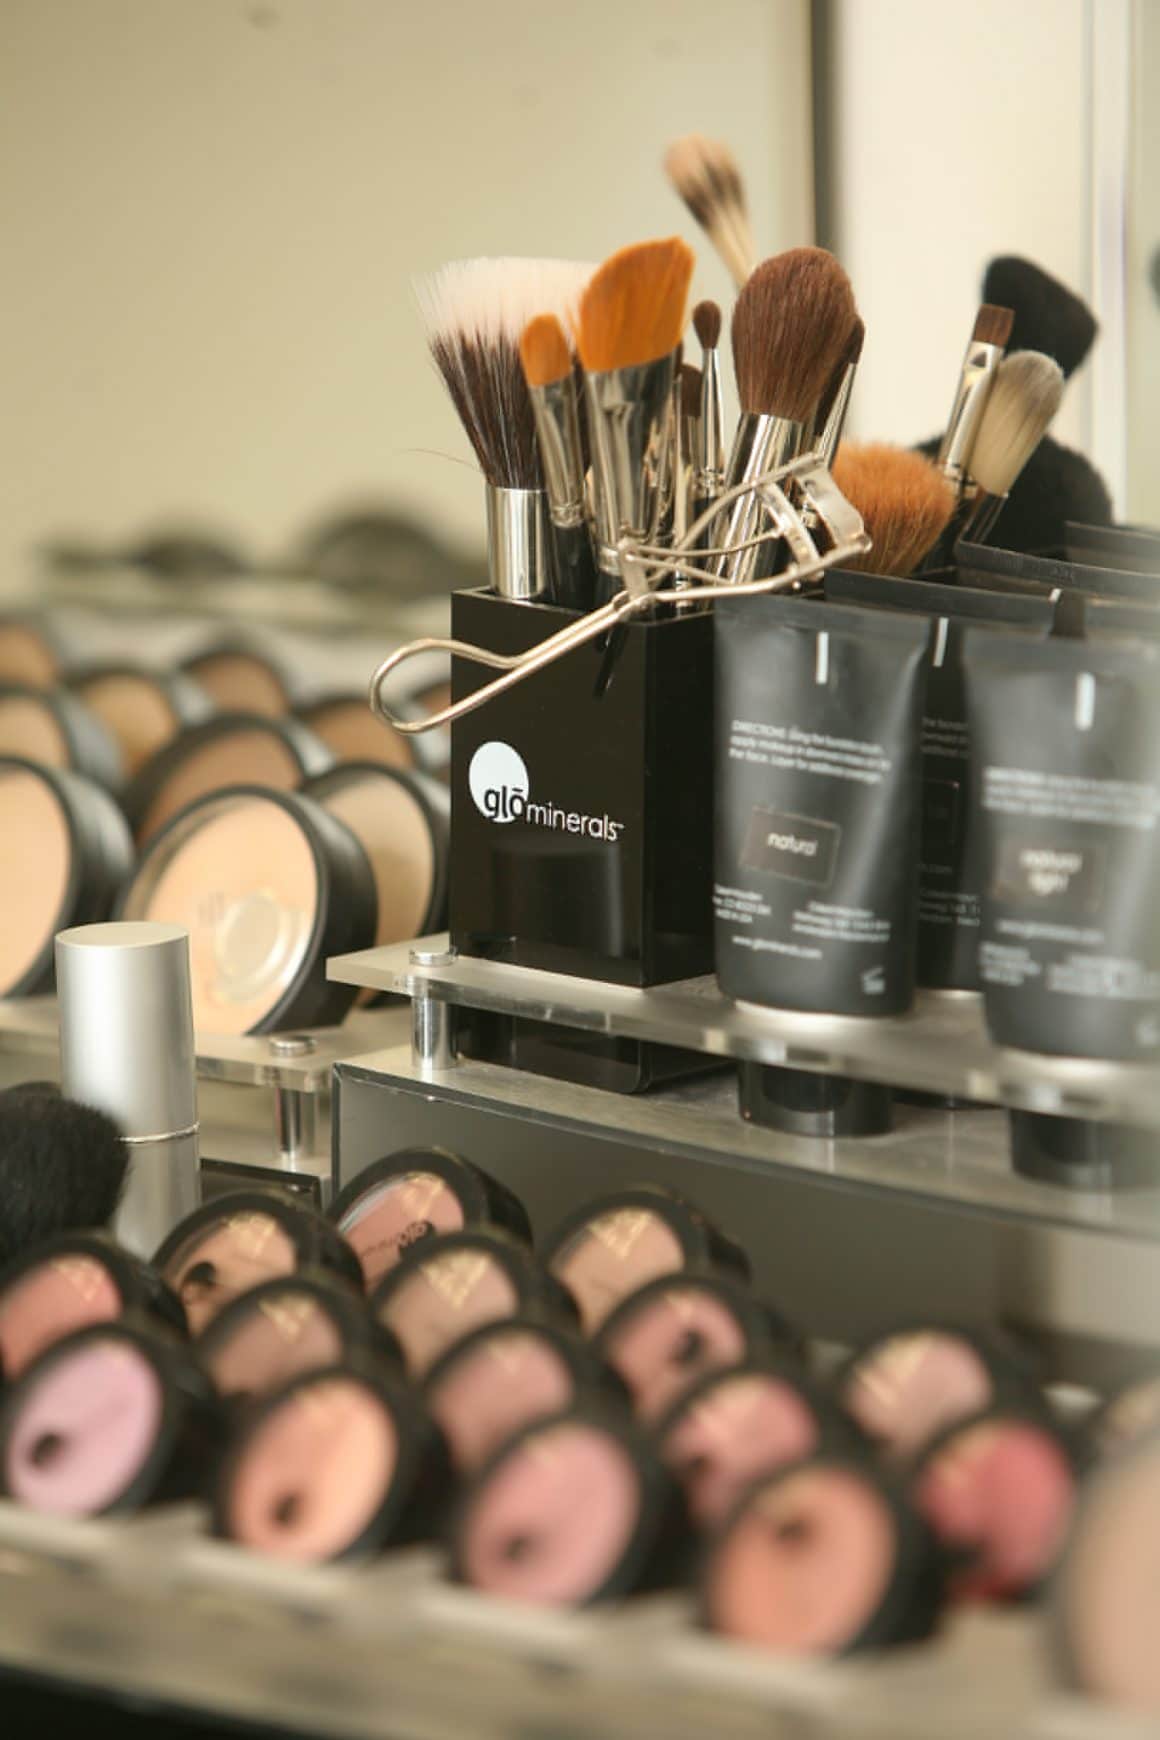 A closeup of our gloMinerals makeup counter